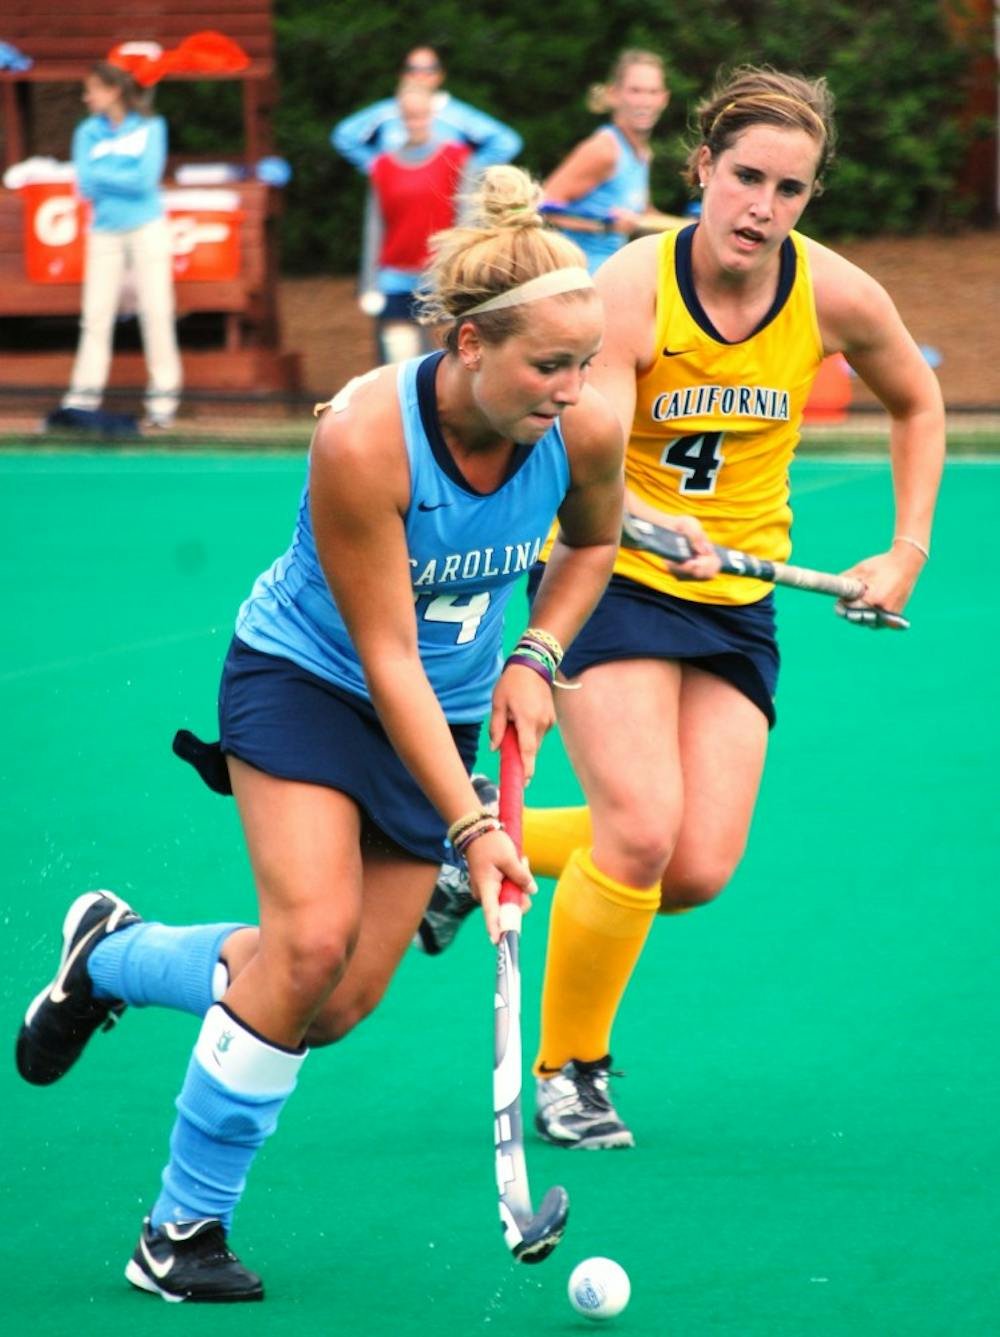 UNC midfielder Kelsey Kolojejchick dribbles against California. The Tar Heels lost for the first time this season to Maryland, 3-2 on Oct. 23.